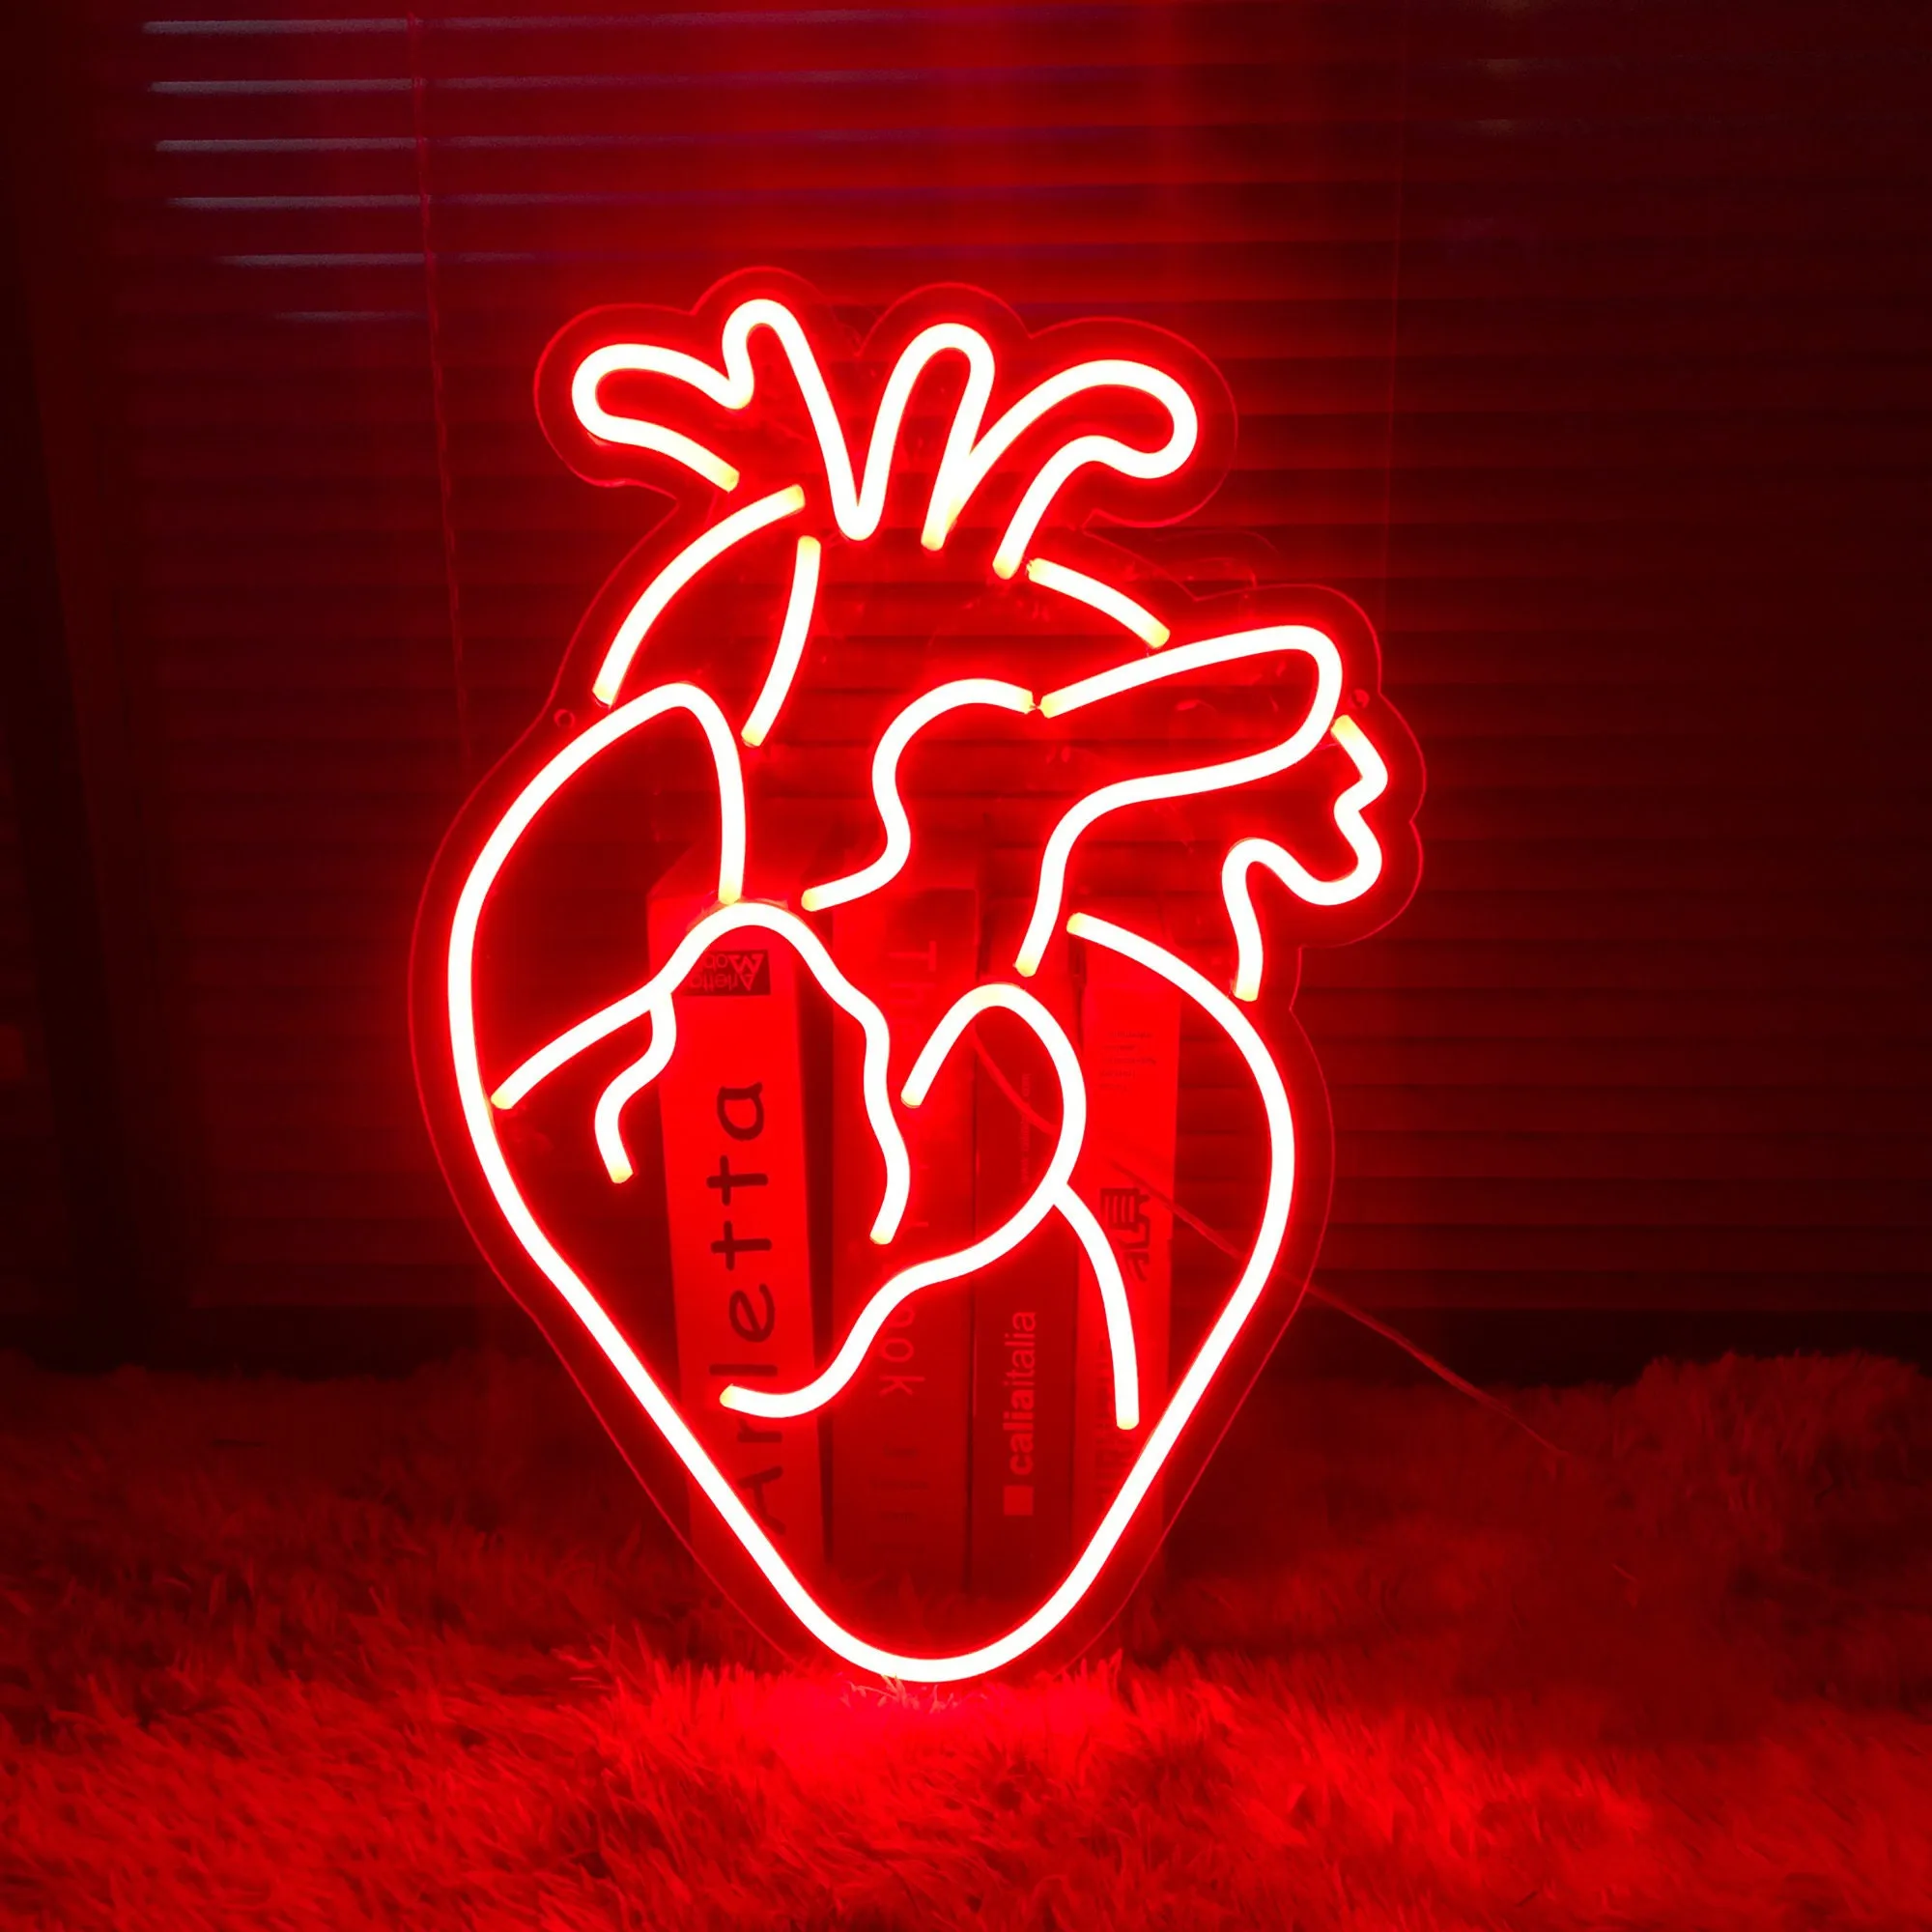 Human Heart Neon Sign ,LED Light, Bar Signs, Neon Lamp Bedroom Wall Decoration, LED Neon Art, Wall Hangings for Living Room